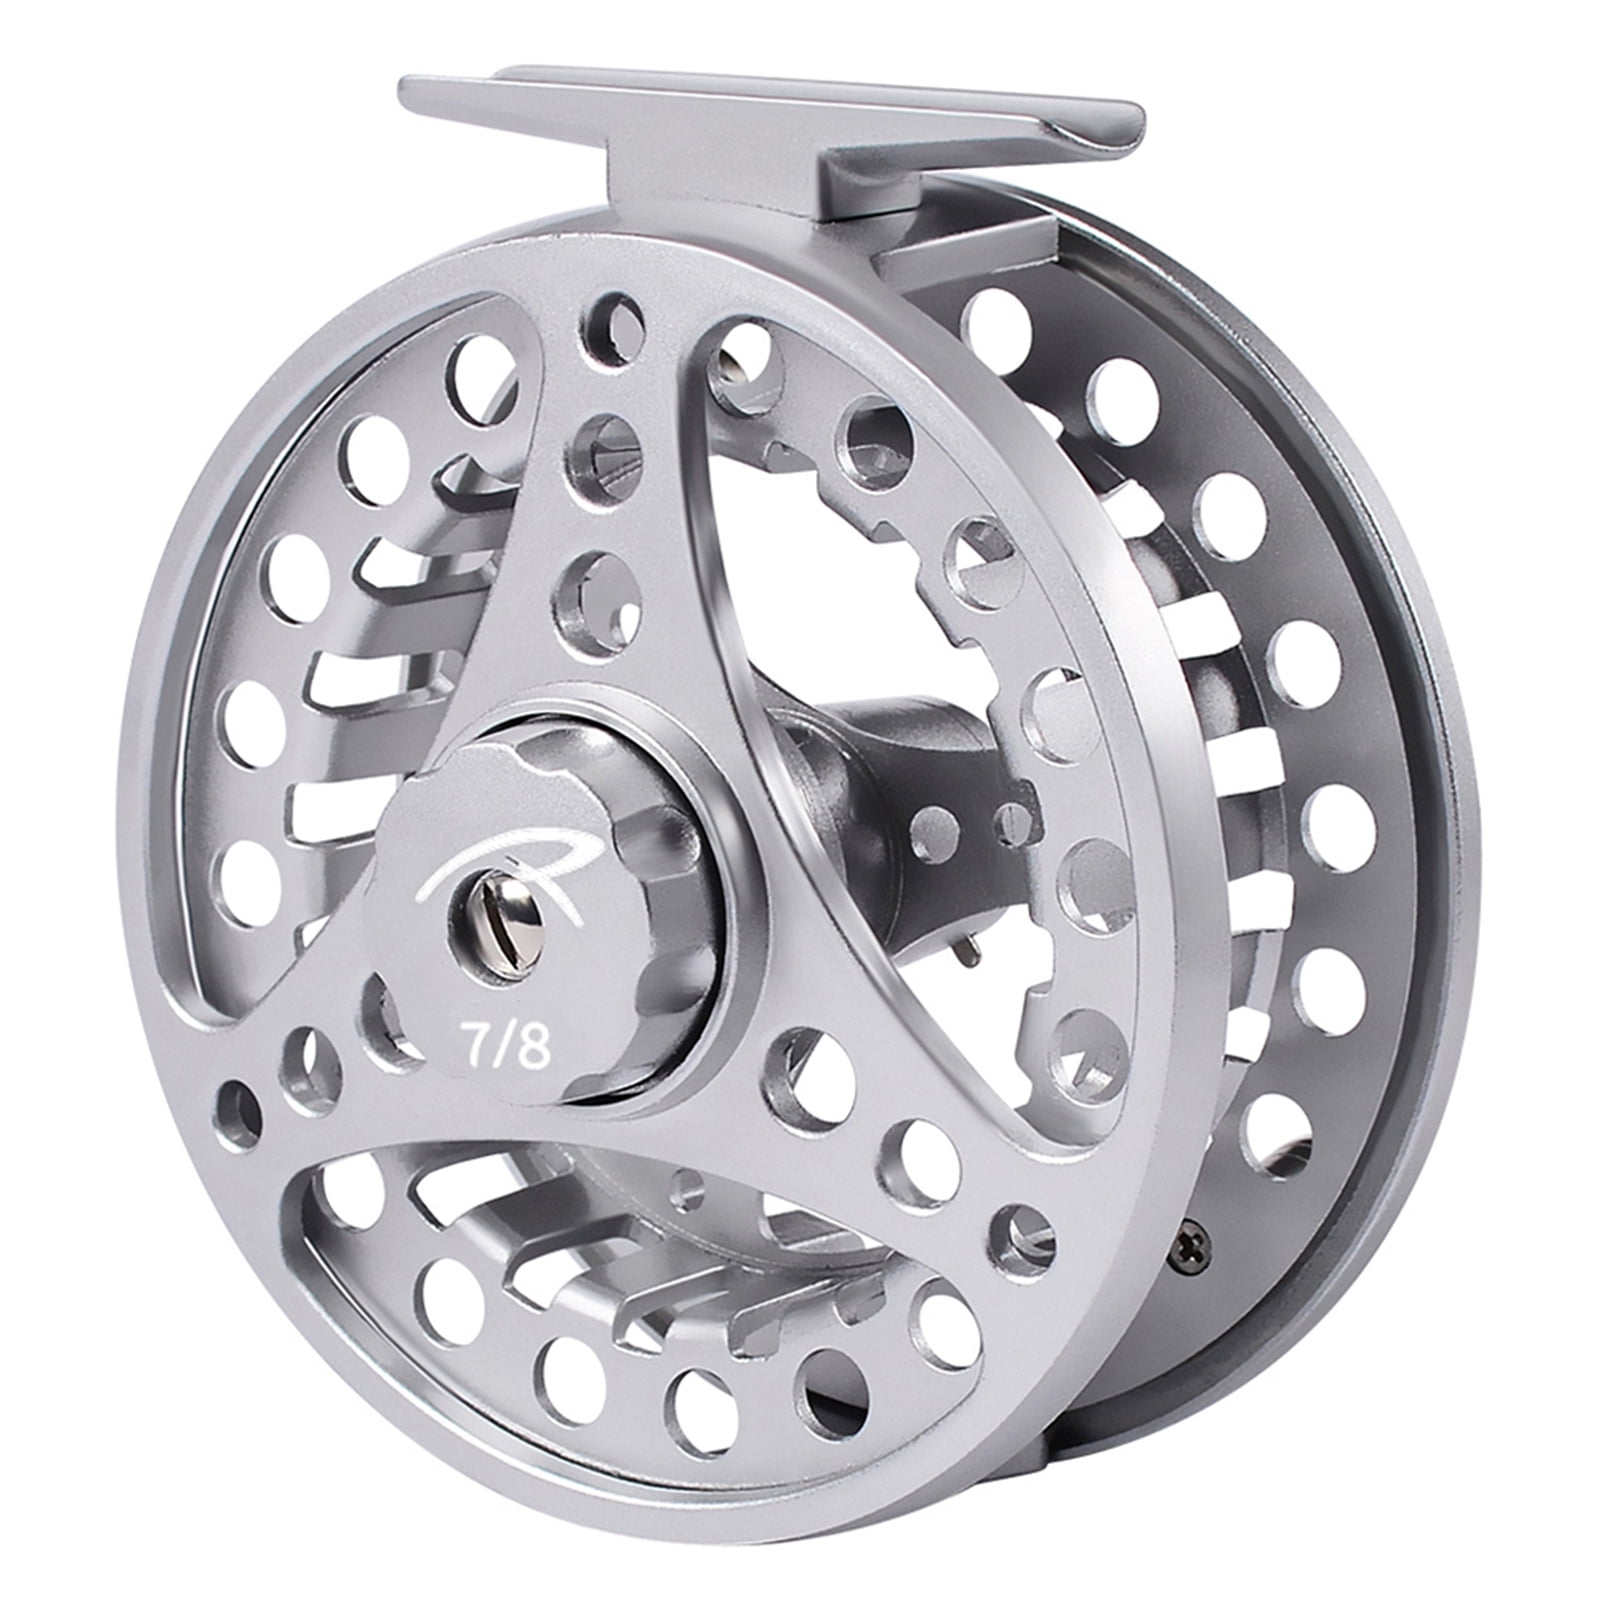 Fly Fishing All Aluminium Alloy Fly Reel 3/4 5/6 7/8 CNC Machined Reel Saltwater 